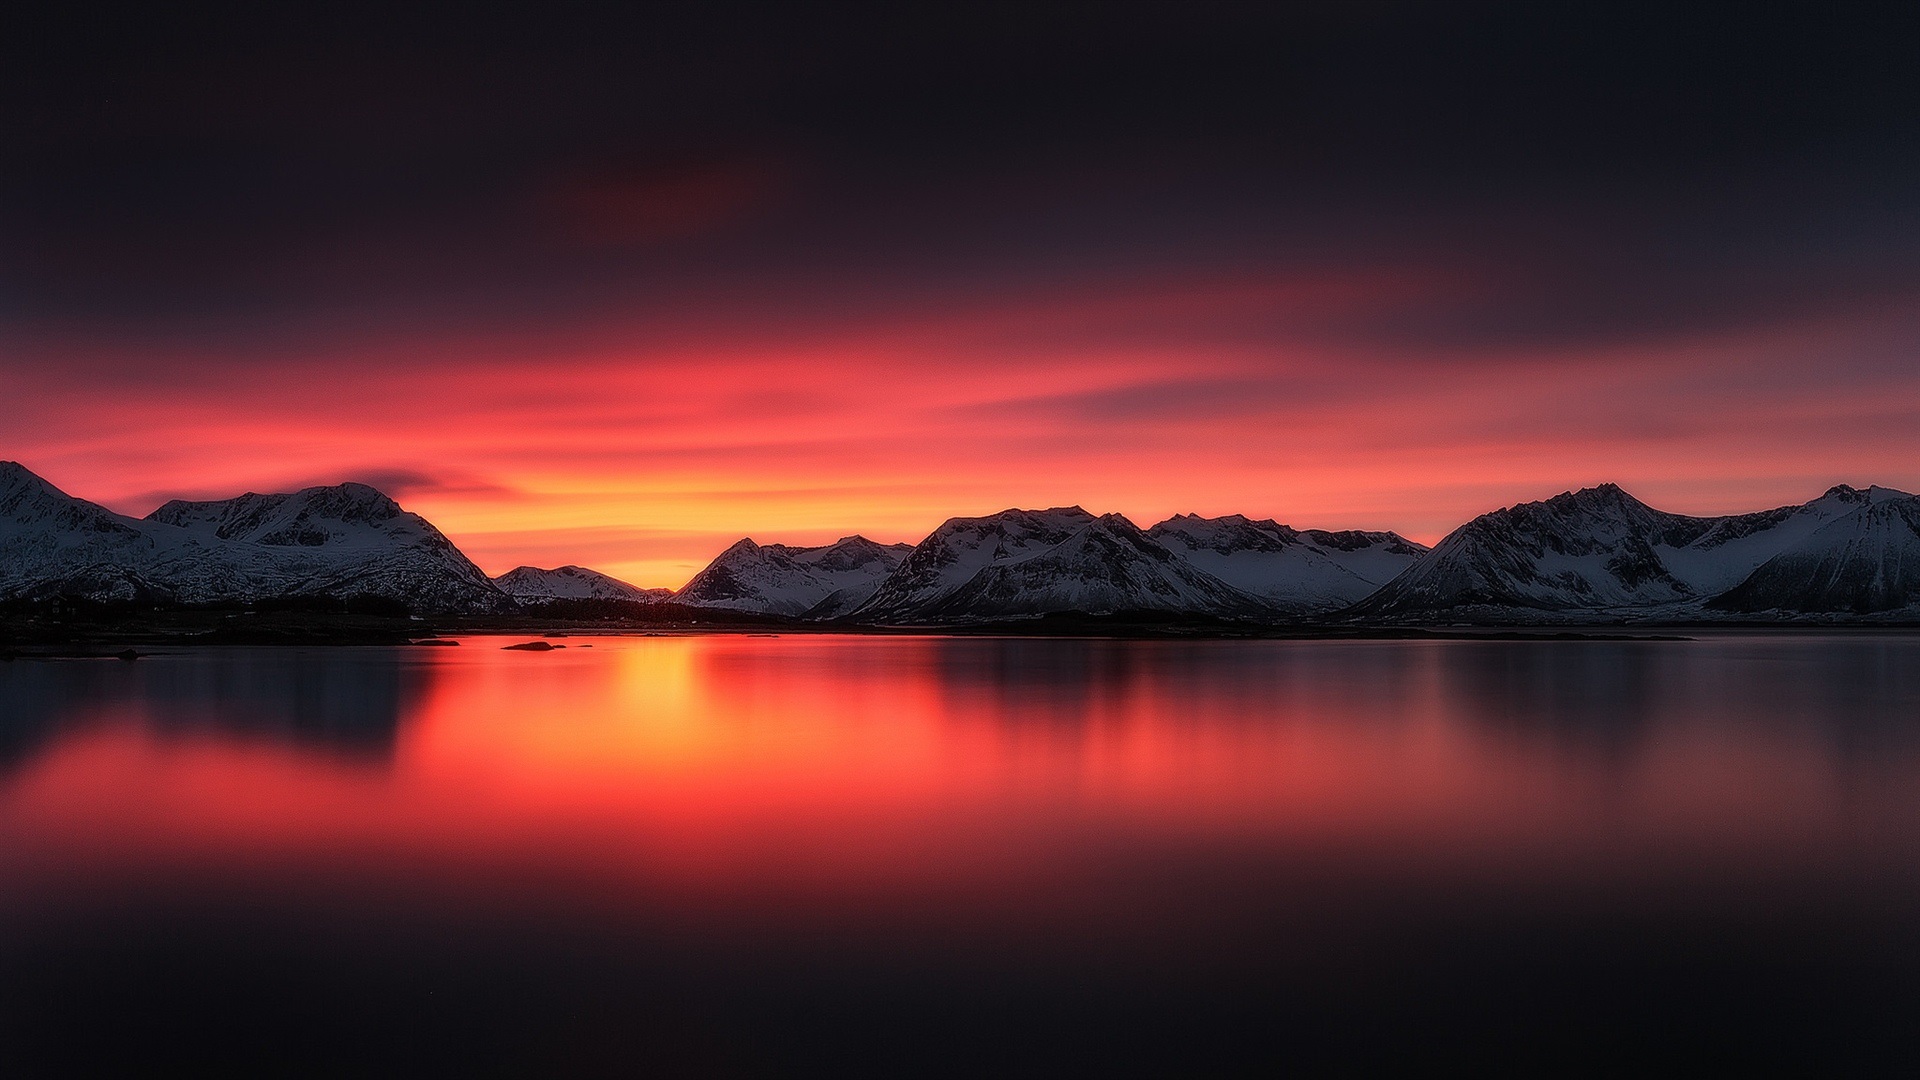 Wallpaper Beautiful Sunset Landscape, Lake, Red Sky, - Mountains With Red  Sky - 1920x1080 Wallpaper 